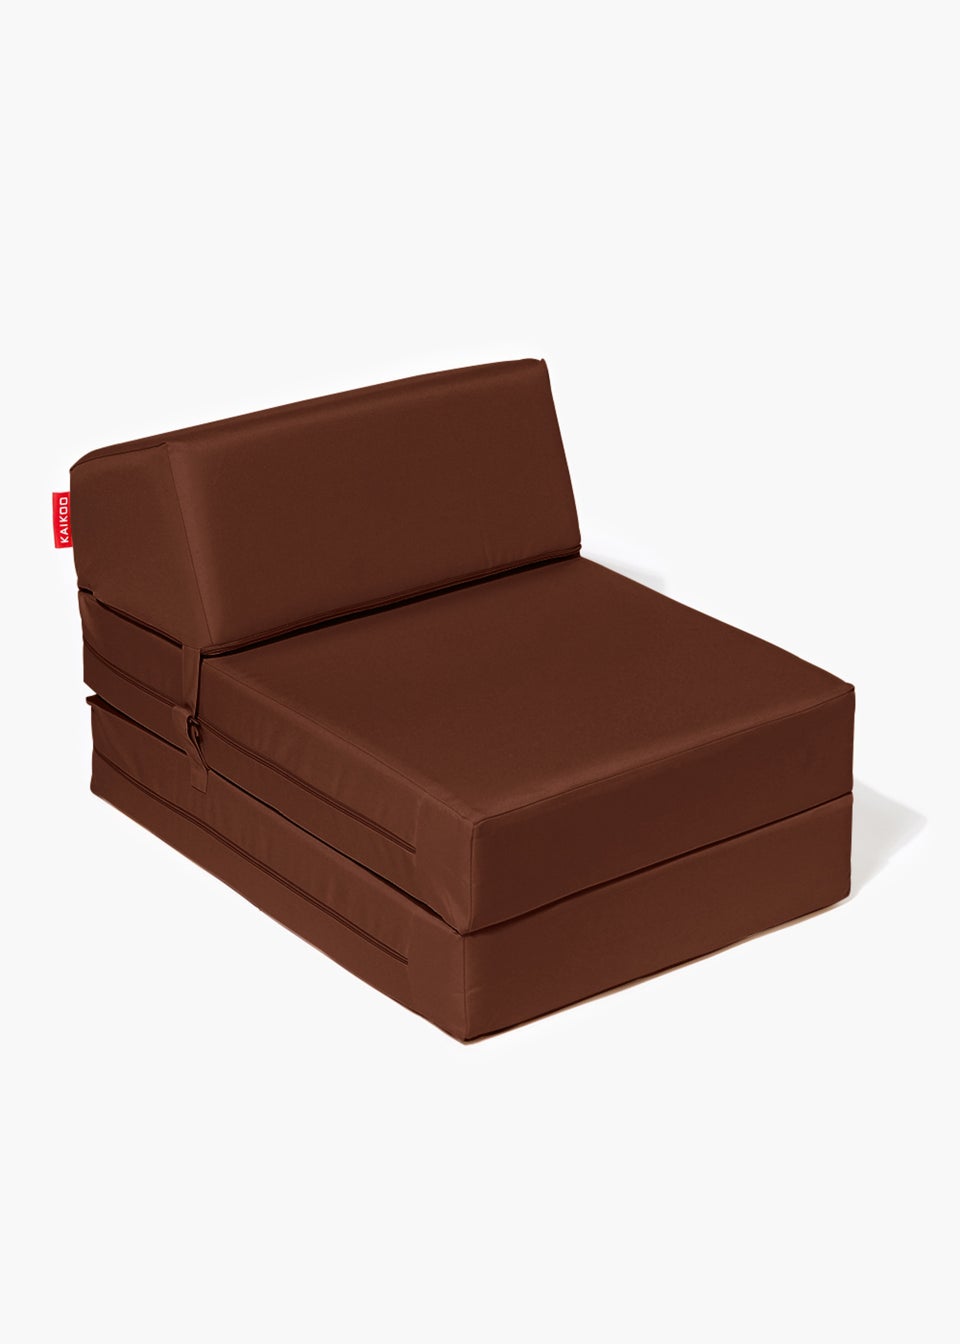 Kaikoo Single Fold-Out Chair Bed Chocolate